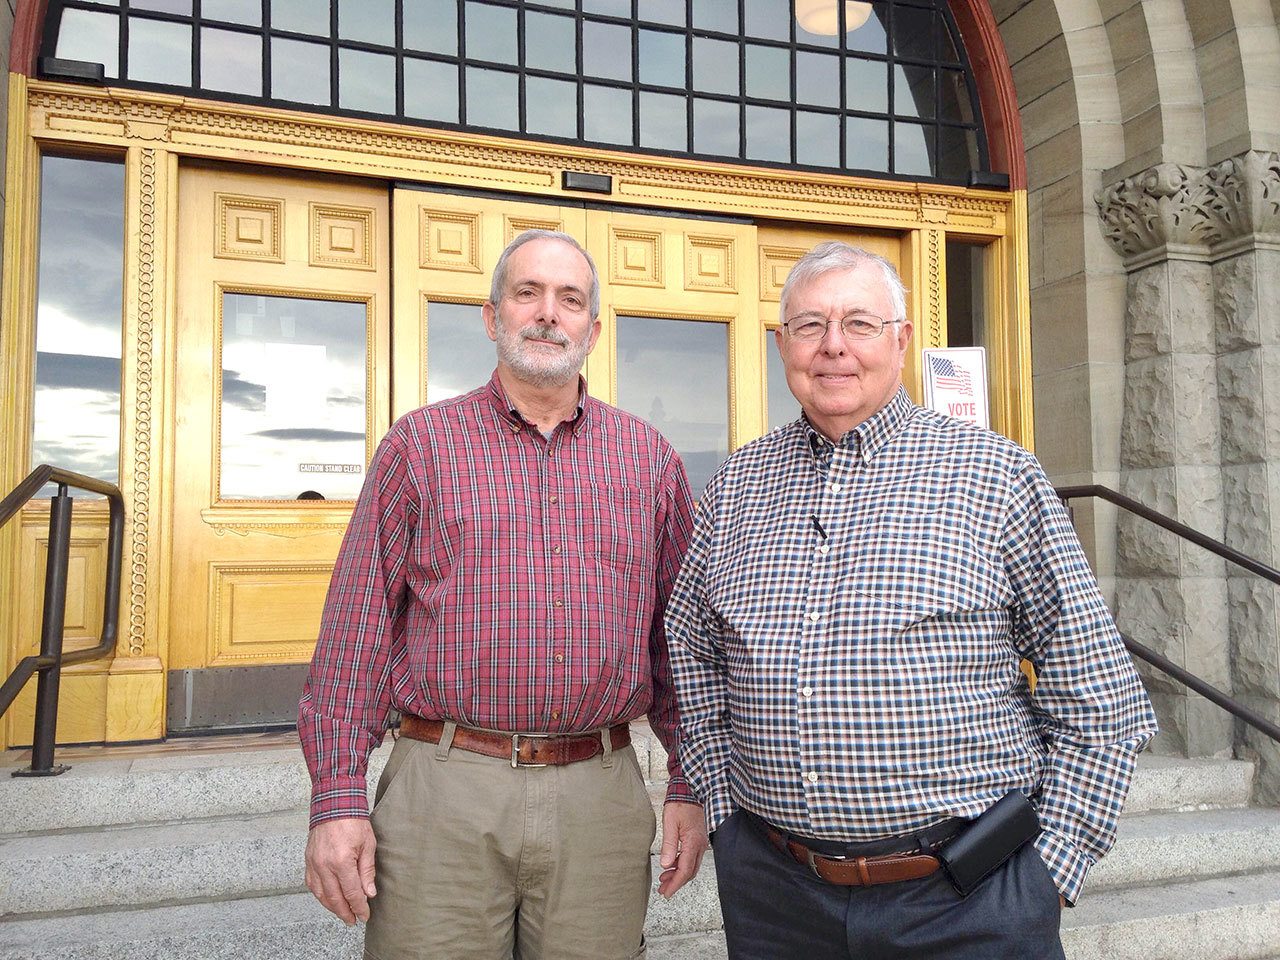 Dave McDermid and Bill Dean of Port Ludlow were two of more than a dozen residents who attended Monday’s county commissioners’ meeting. (Cydney McFarland/Peninsula Daily News)